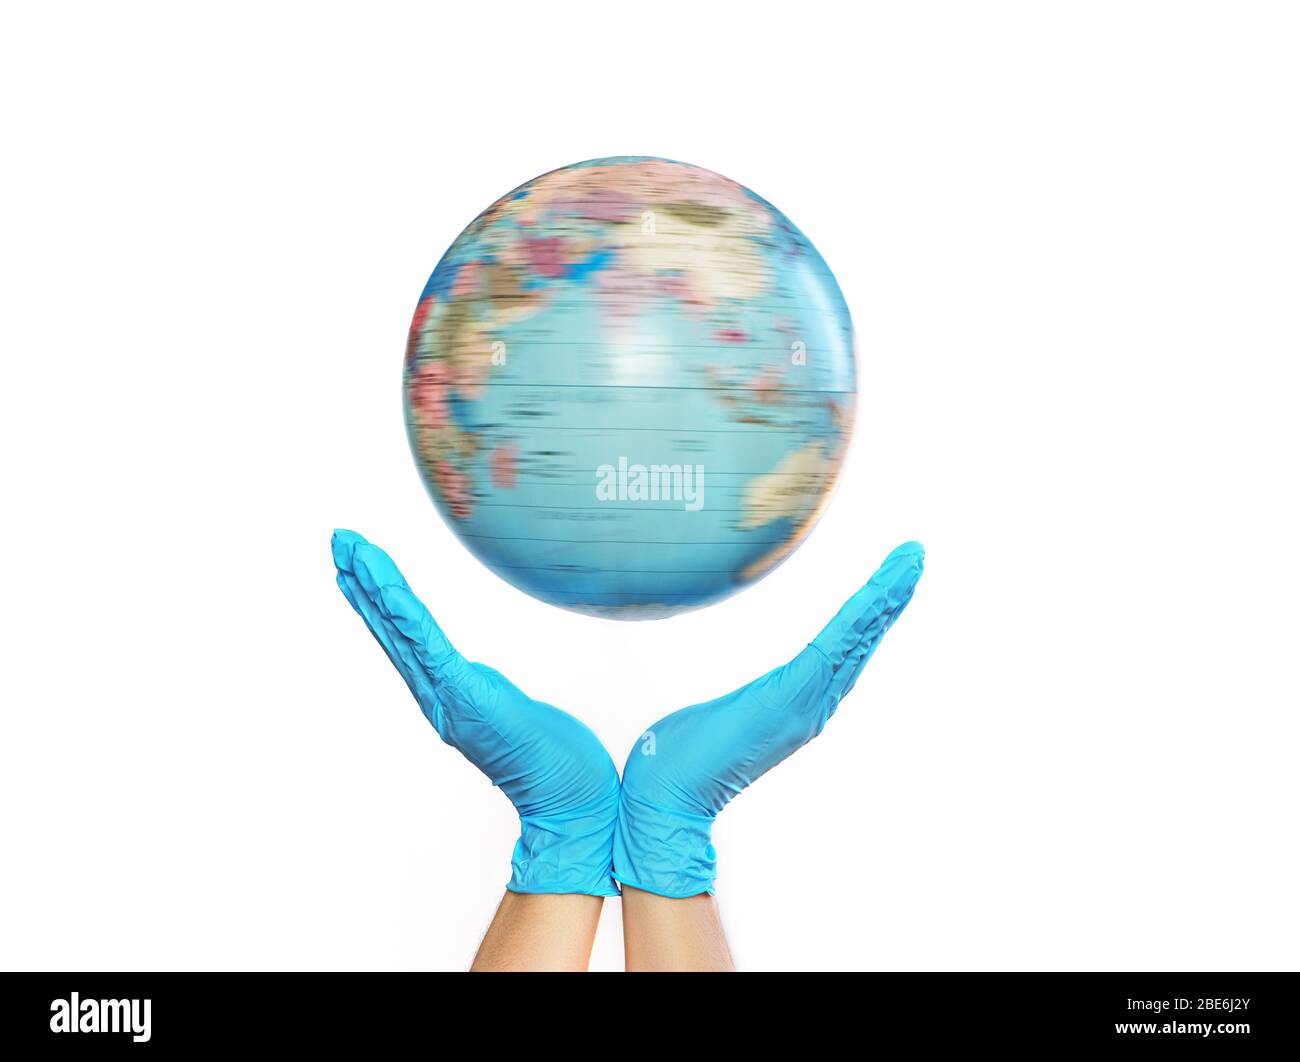 Hands in medical gloves holding turninig globe on a white background. COVID-19 pandemic concept. Stock Photo